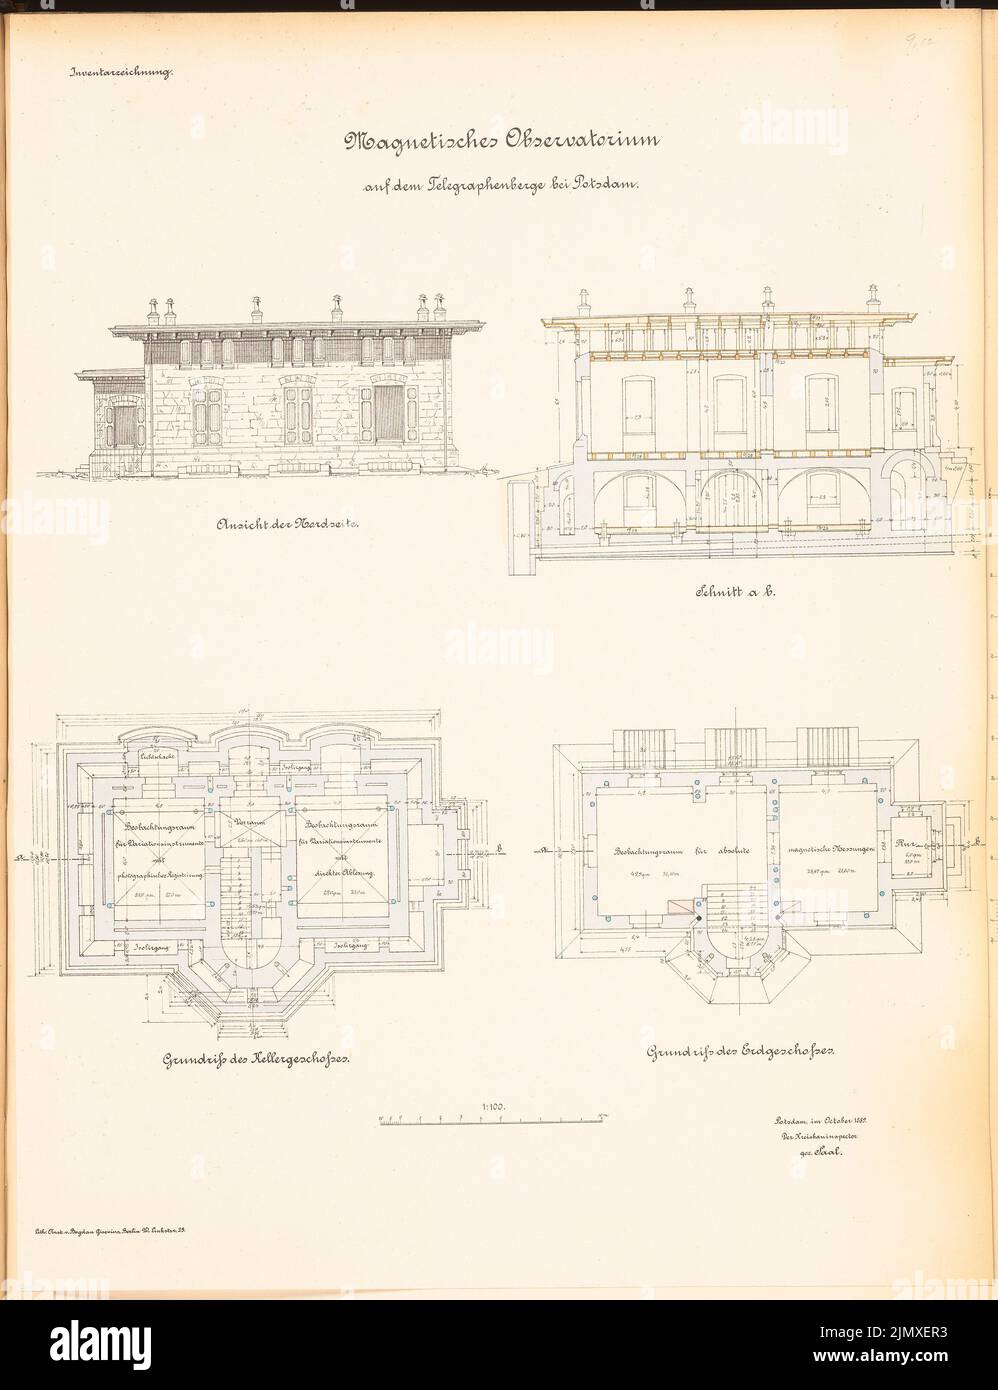 Spieker Paul (1826-1896), magnetic observatory at the Telegrafenberg in Potsdam (approx. 1889/1890): View north side, cut, floor plan, EG 1: 100. Lithograph colored on paper, 64 x 49.1 cm (including scan edges) Spieker Paul  (1826-1896): Magnetisches Observatorium auf dem Telegrafenberg, Potsdam Stock Photo